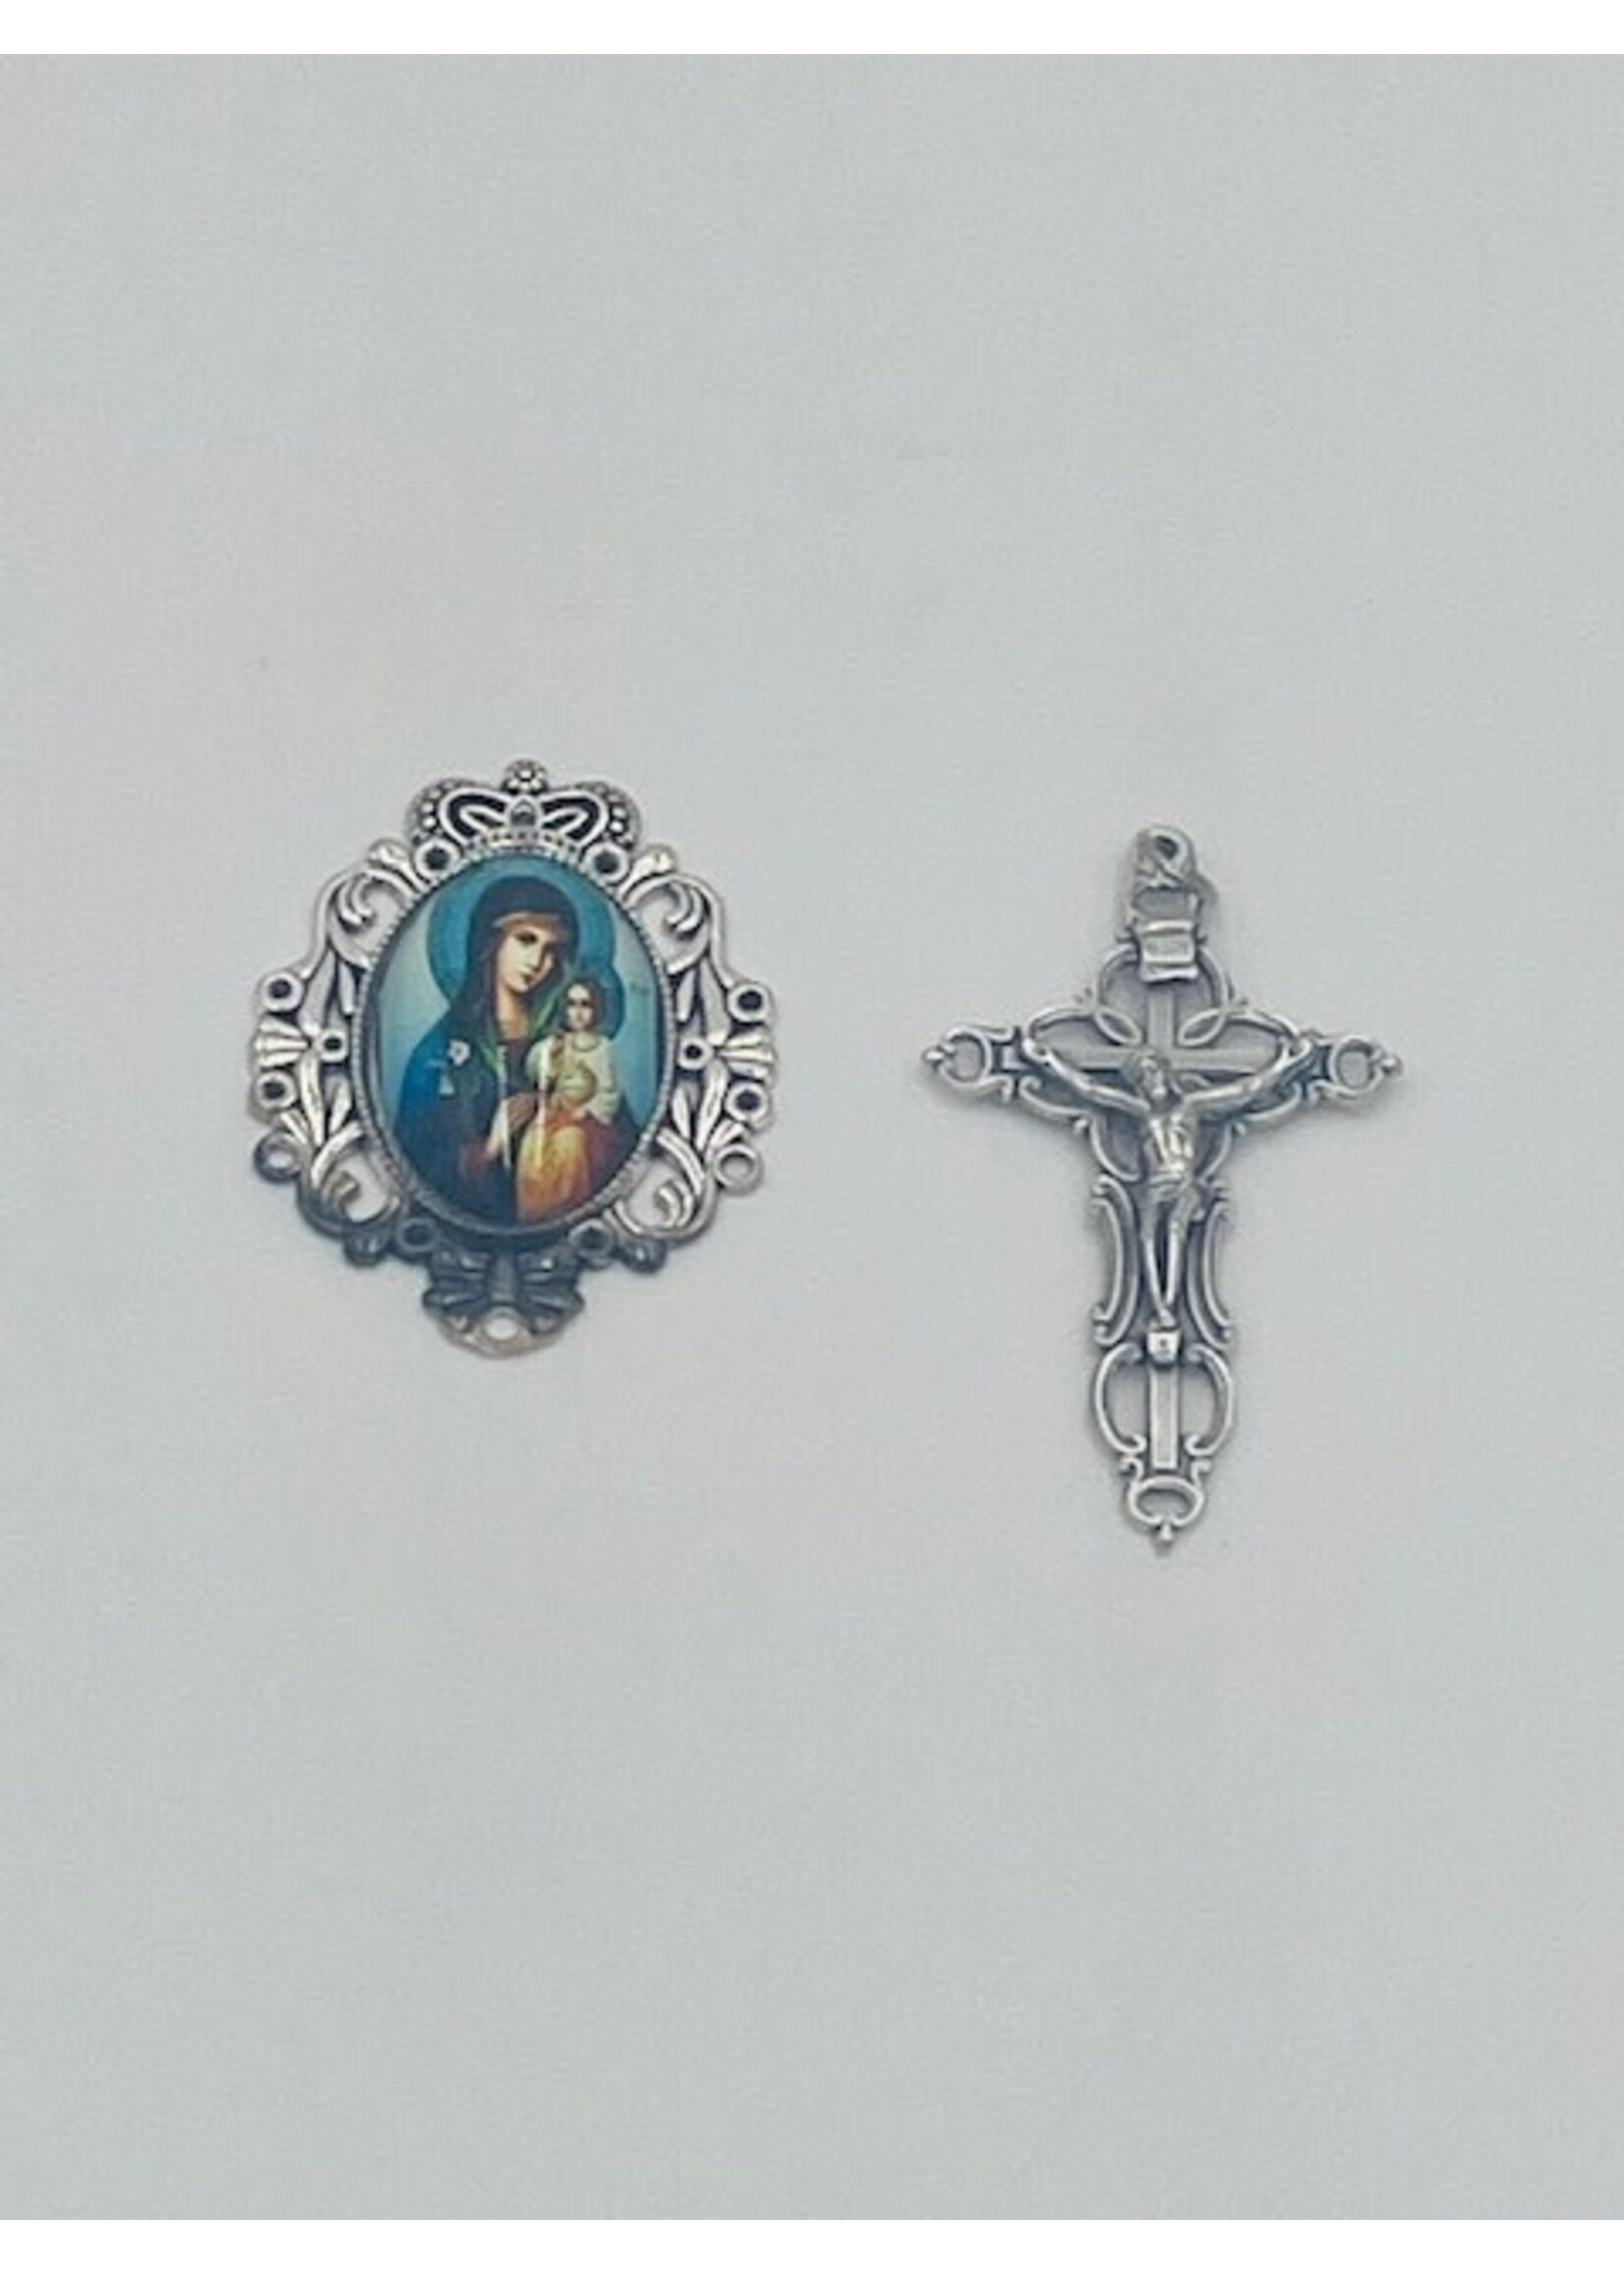 Our Lady of Perpetual Help Rosary Center + Crucifix Set